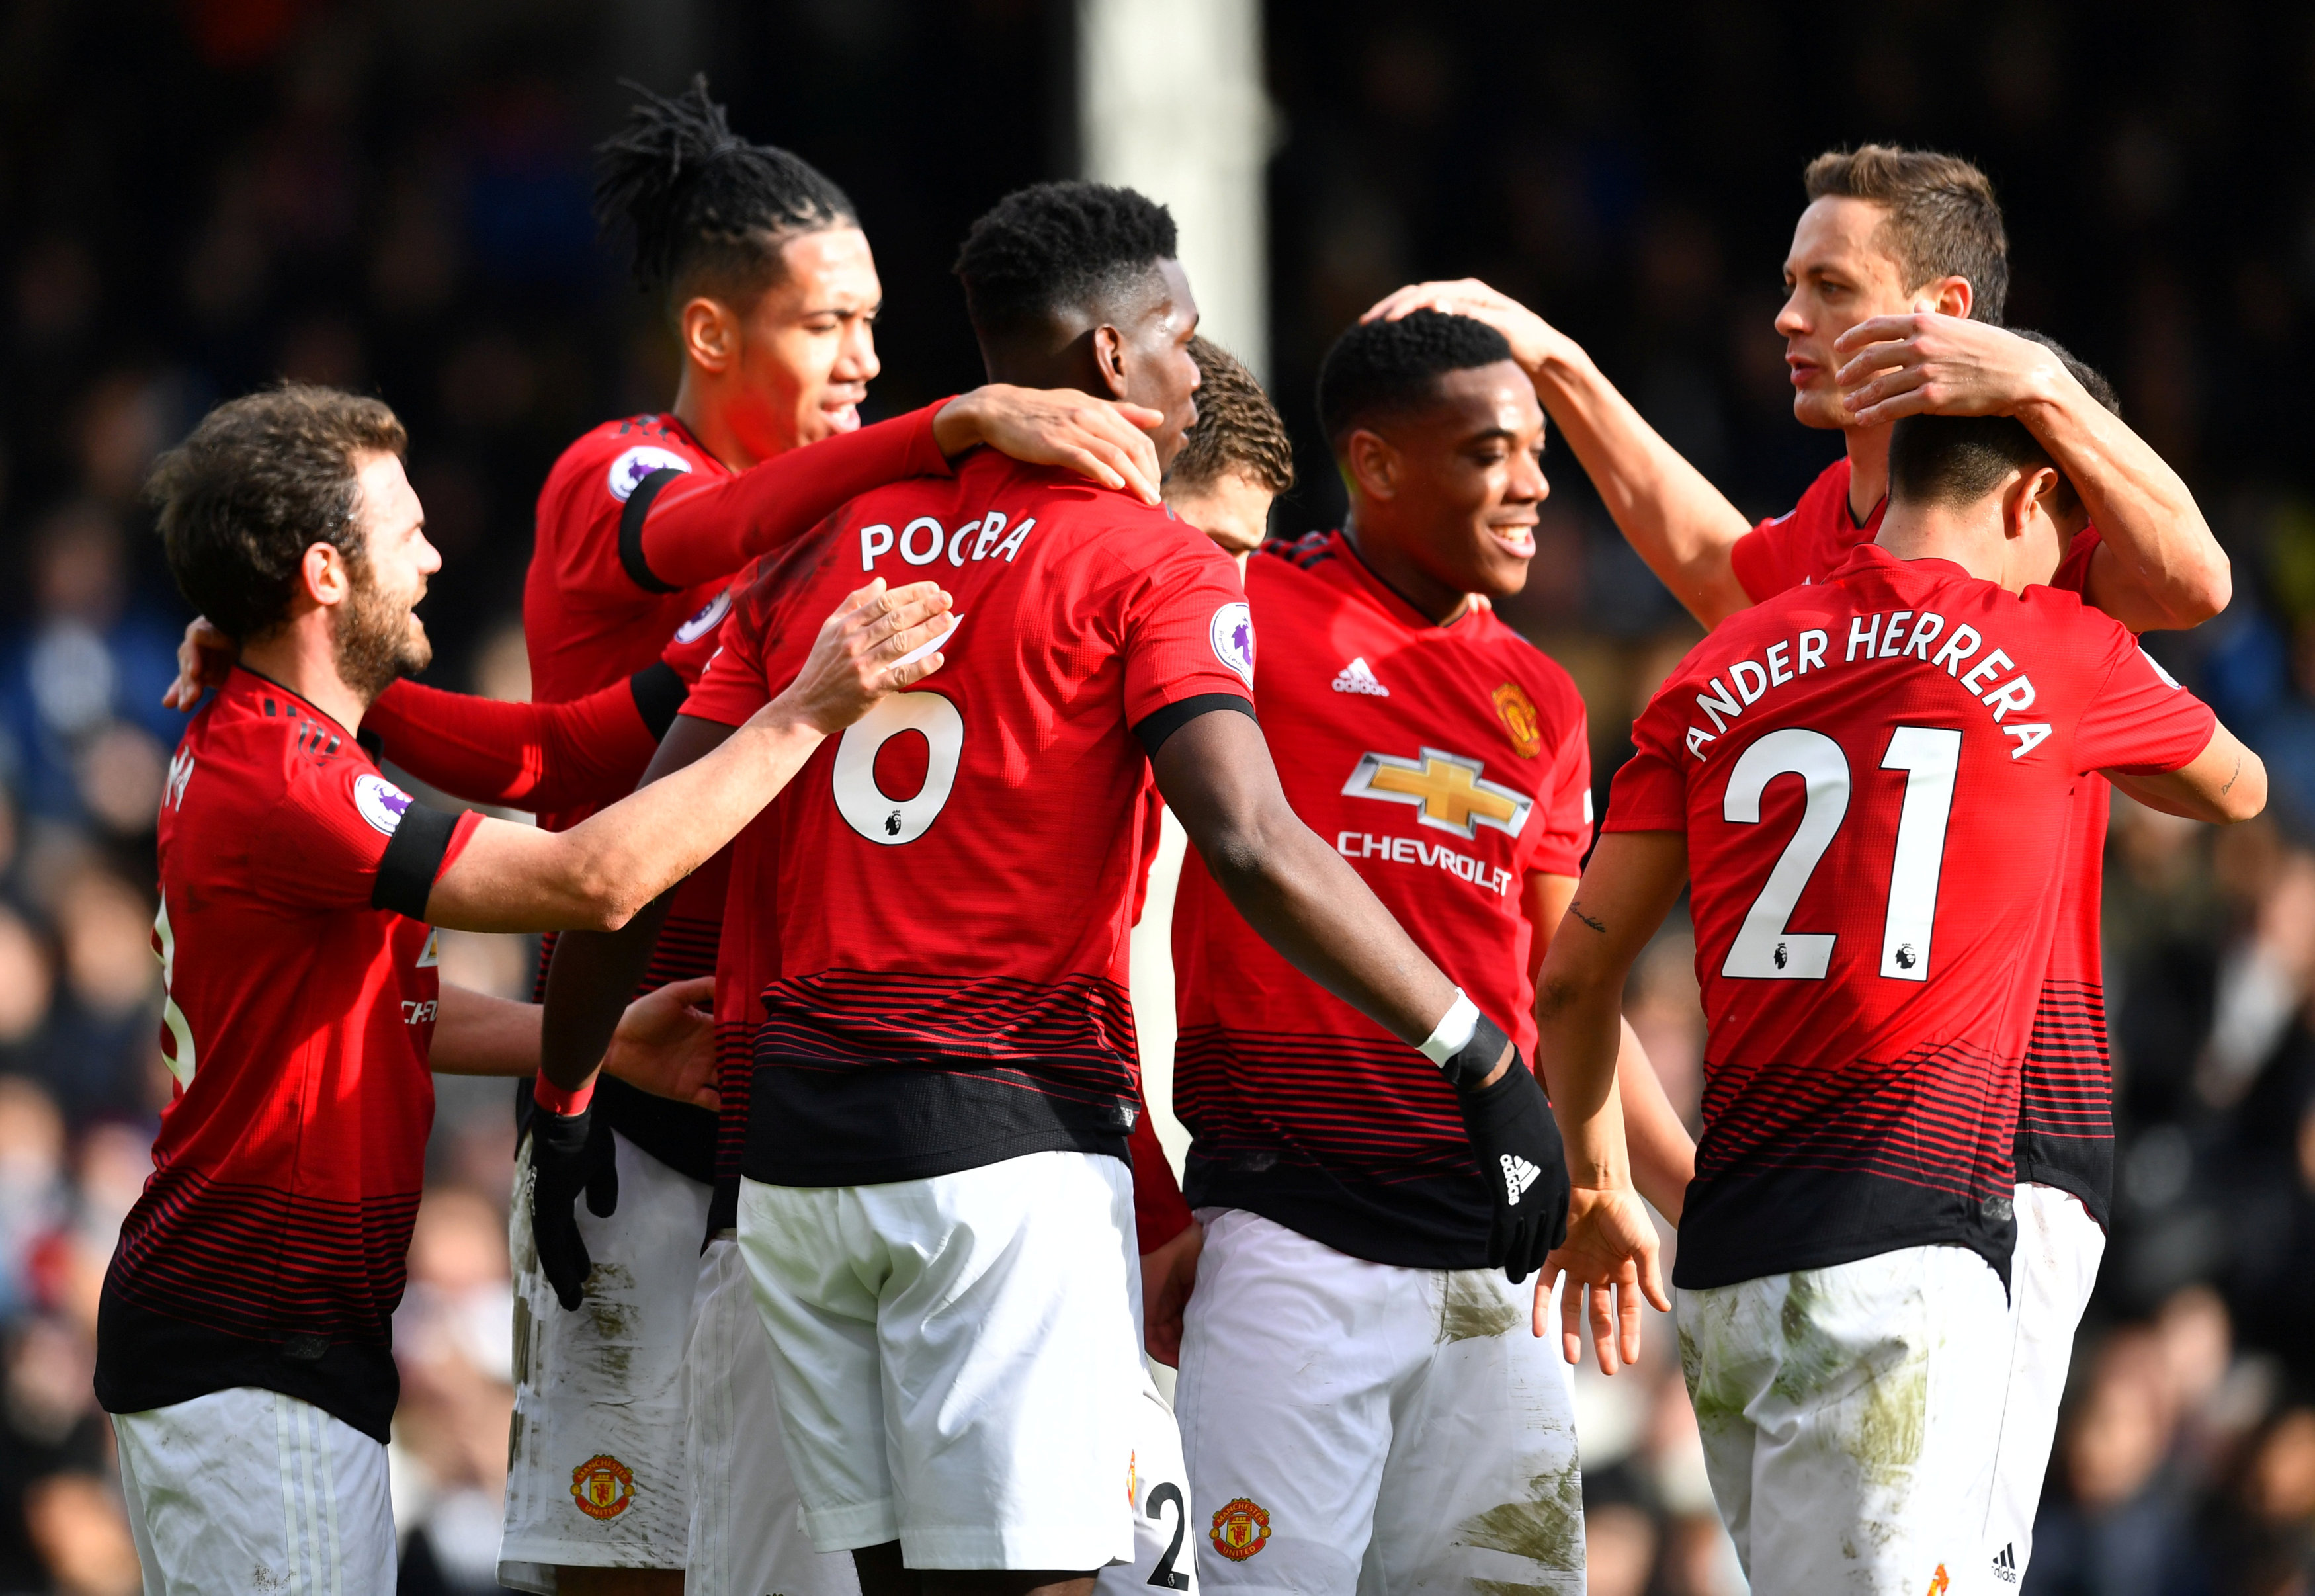 Soccer Football - Premier League - Fulham v Manchester United - Craven Cottage, London, Britain - Febraury 9, 2019  Manchester United's Paul Pogba celebrates scoring their third goal with Juan Mata and team mates.  REUTERS